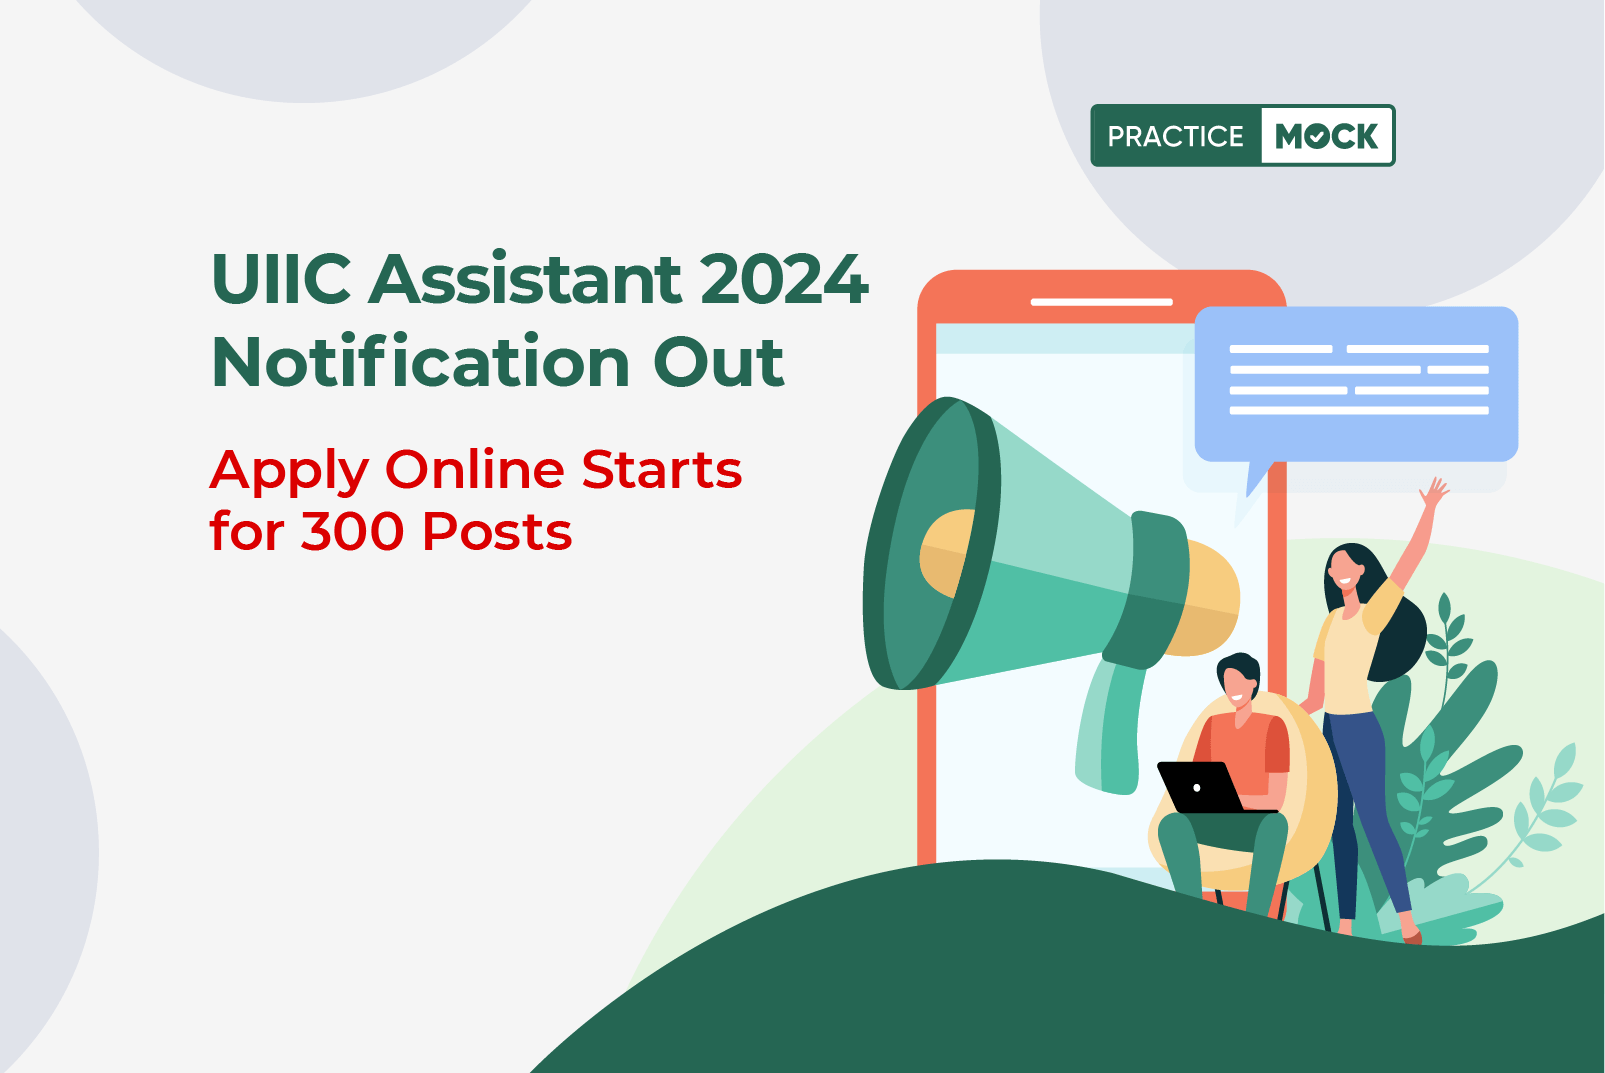 UIIC Assistant 2024 Notification